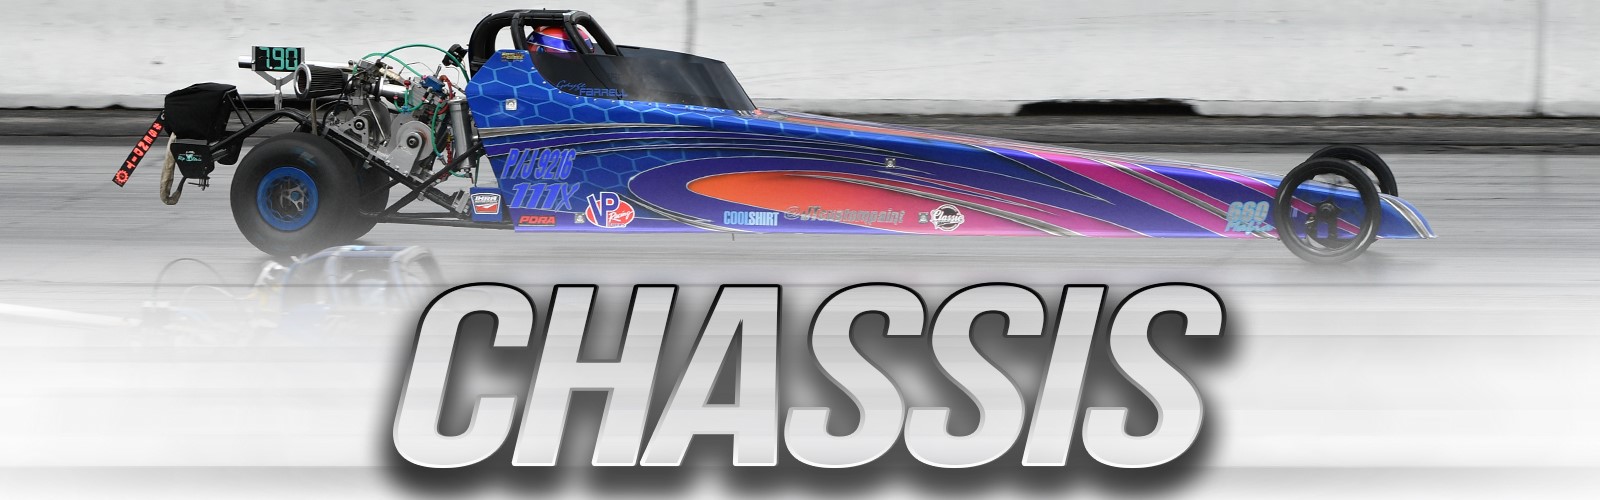 Jr Dragster Plus - Chassis Forum Topic